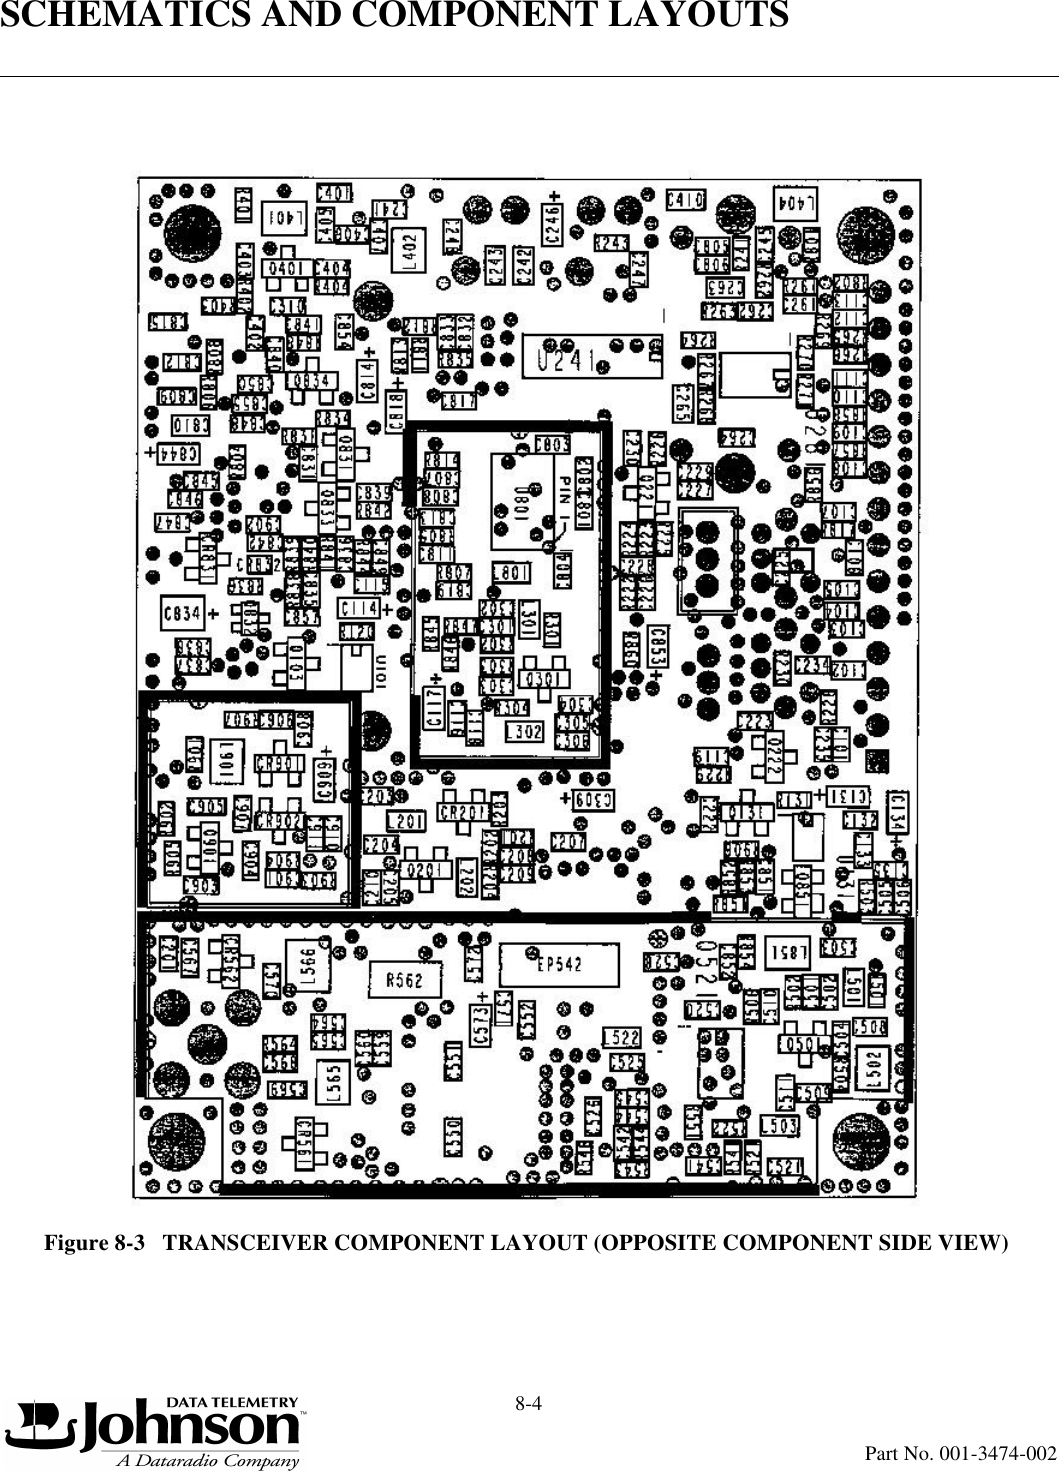 SCHEMATICS AND COMPONENT LAYOUTS8-4Part No. 001-3474-002Figure 8-3   TRANSCEIVER COMPONENT LAYOUT (OPPOSITE COMPONENT SIDE VIEW)